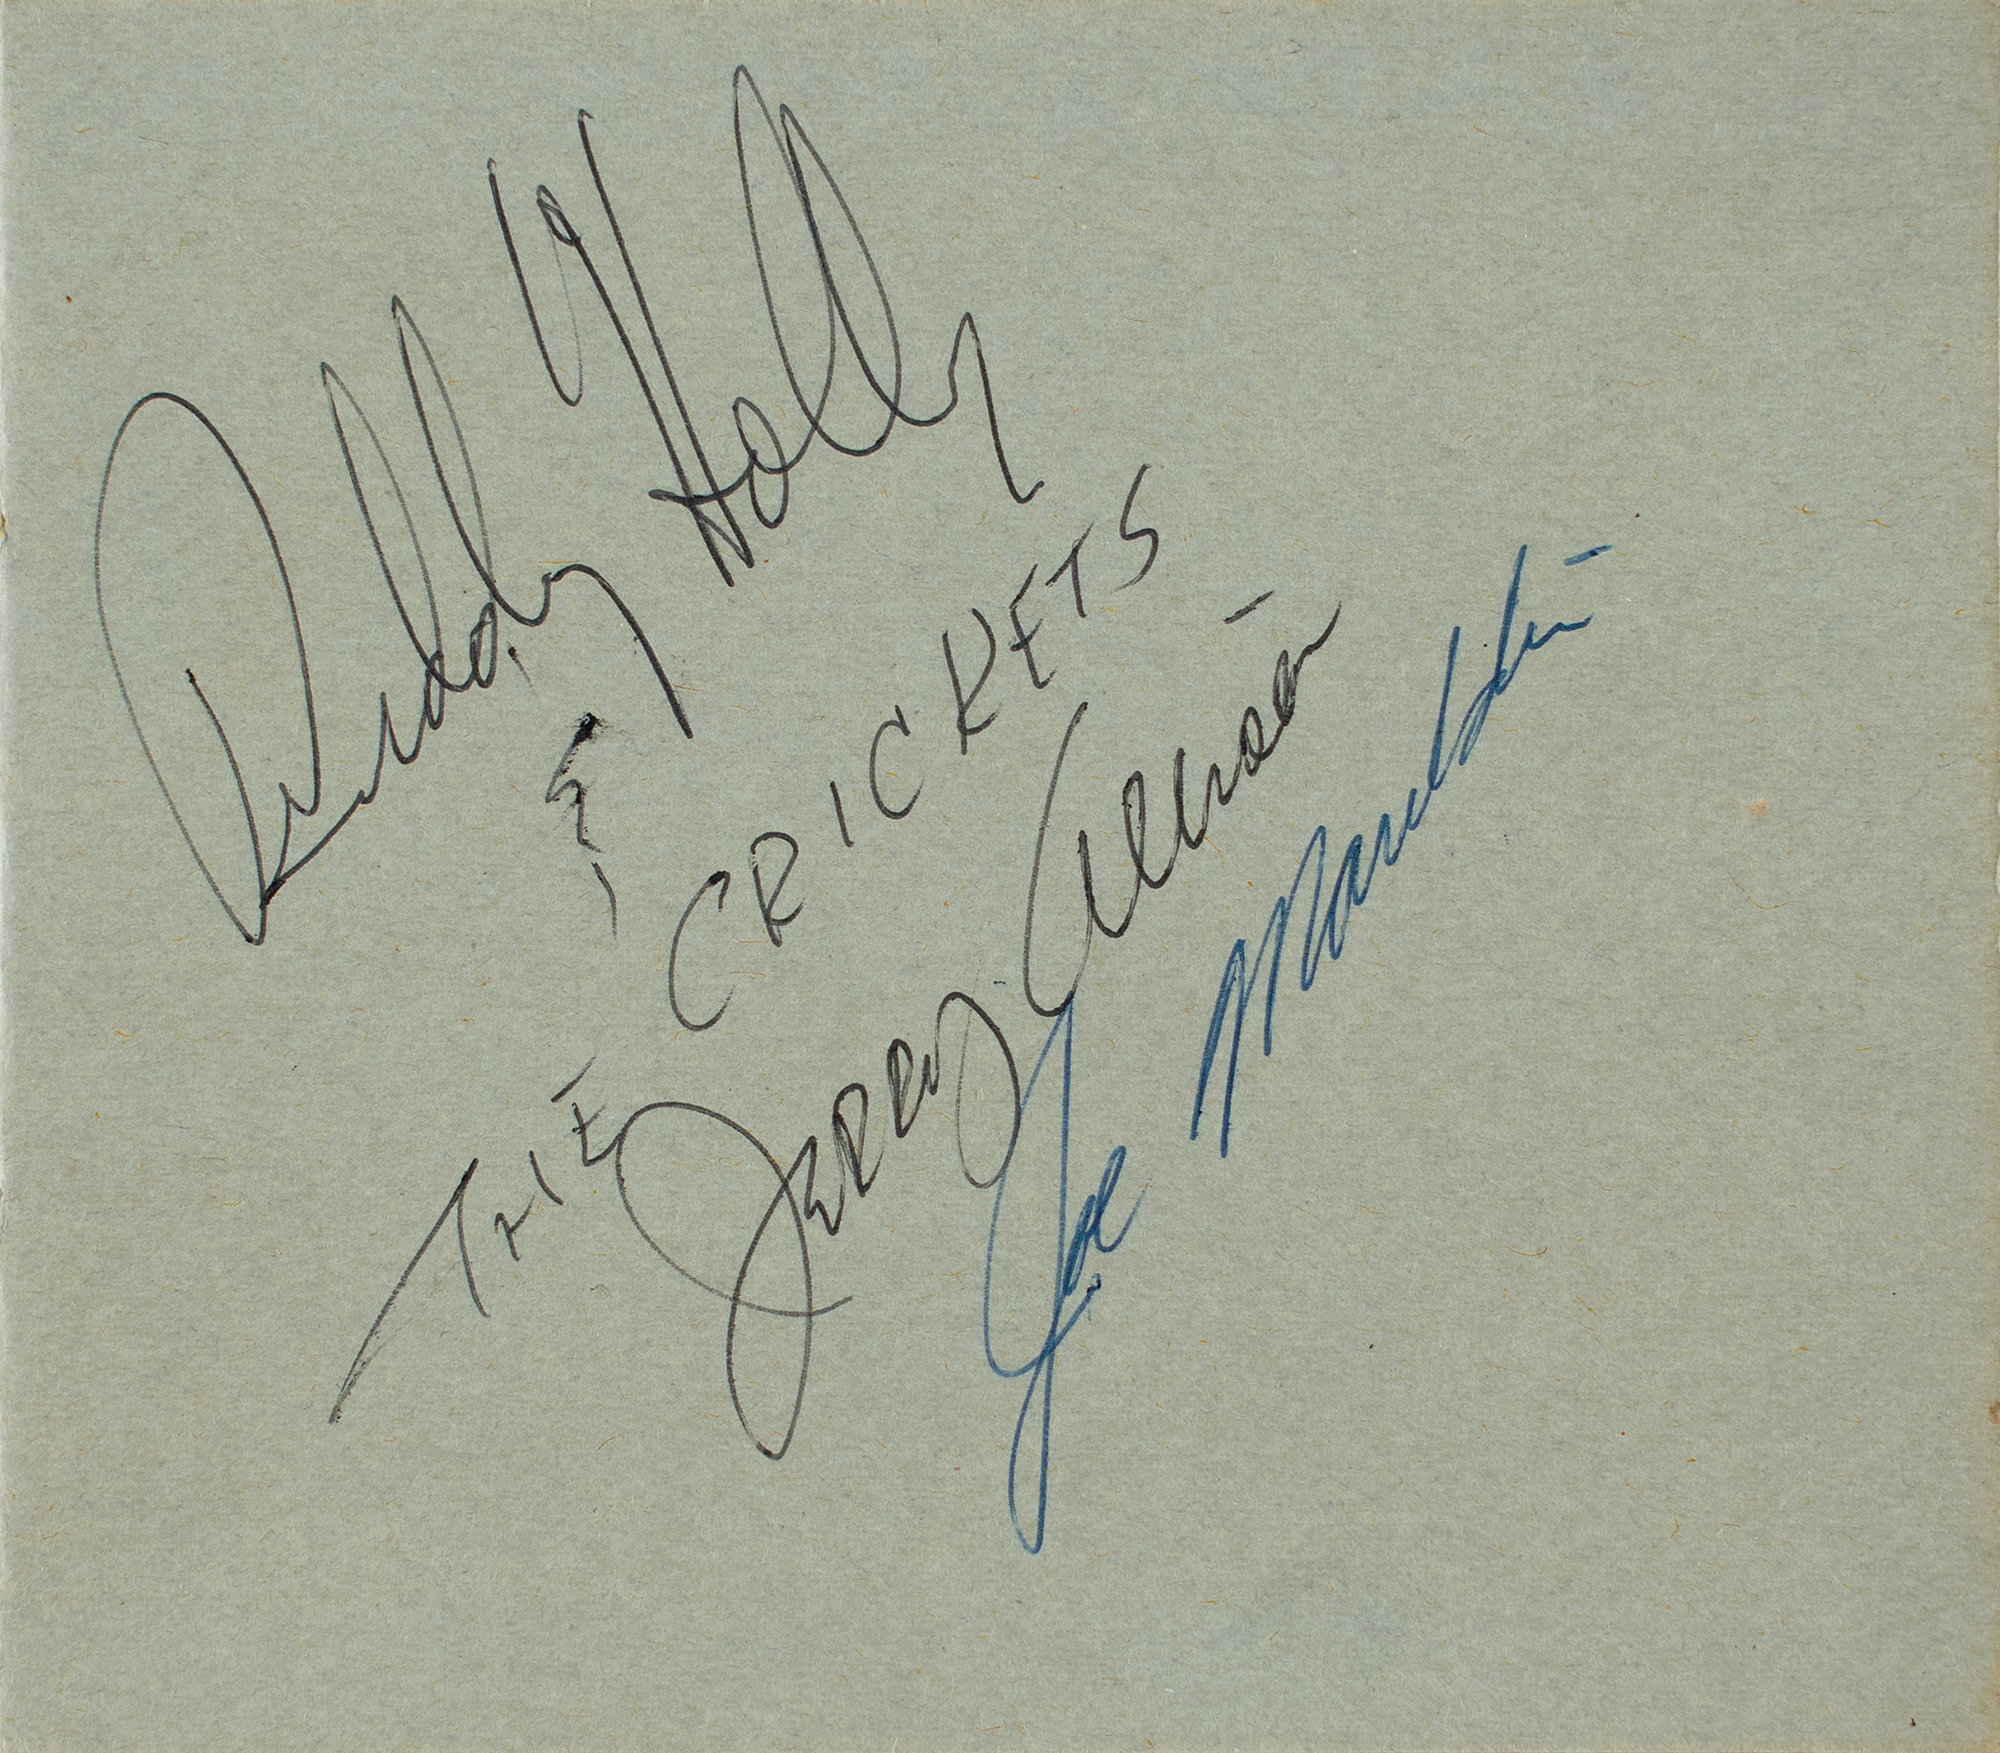 Lot #618 Buddy Holly and the Crickets Signatures